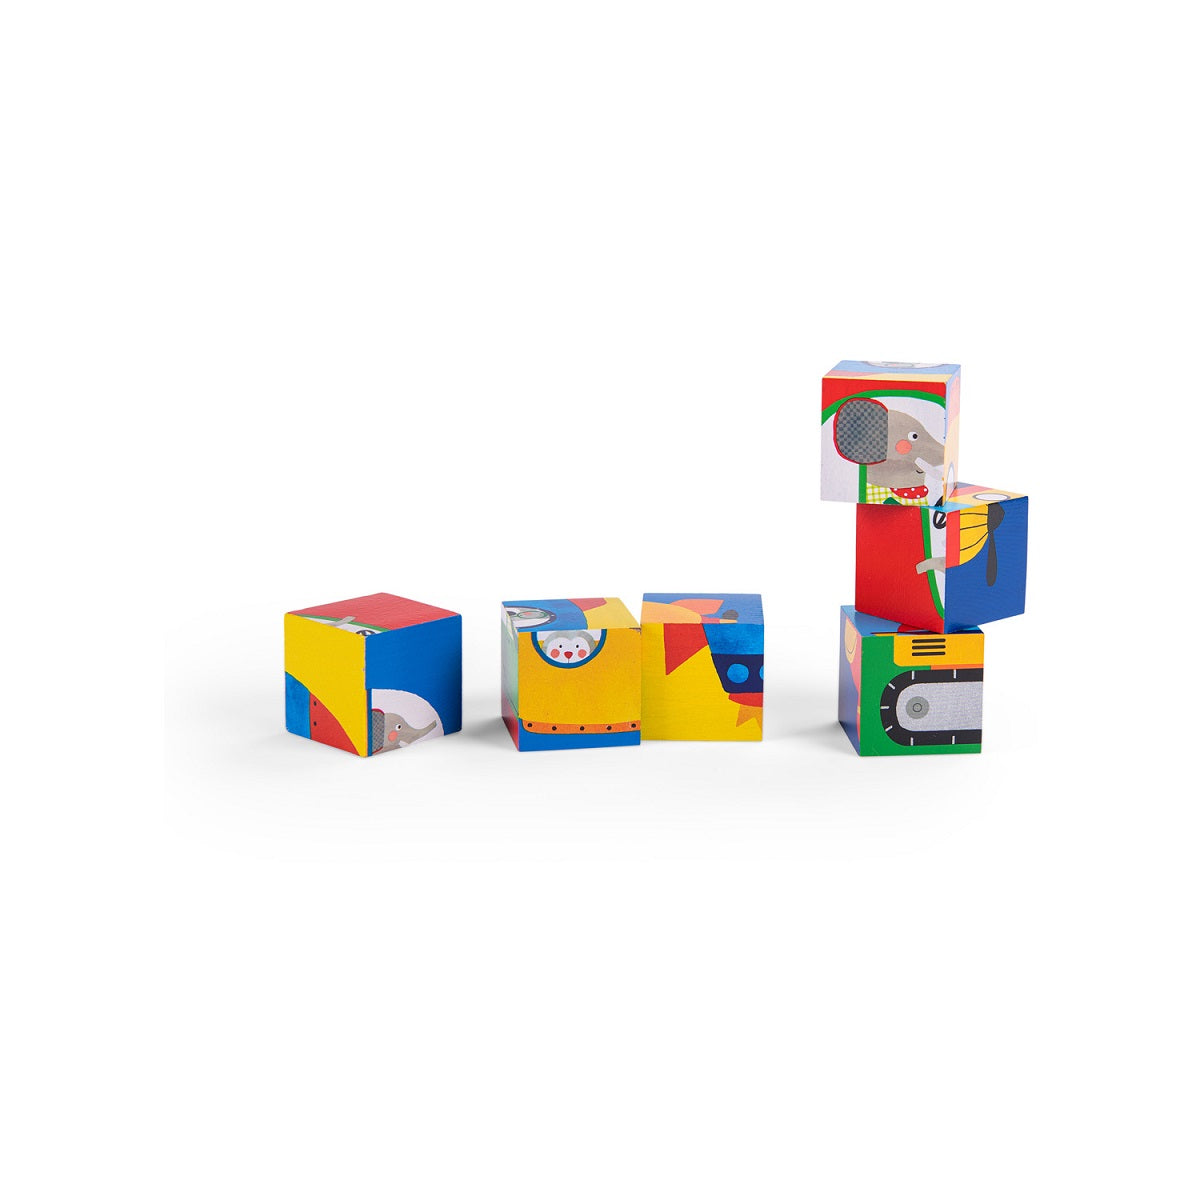 Moulin Roty Popipop 6 Cubes Puzzle